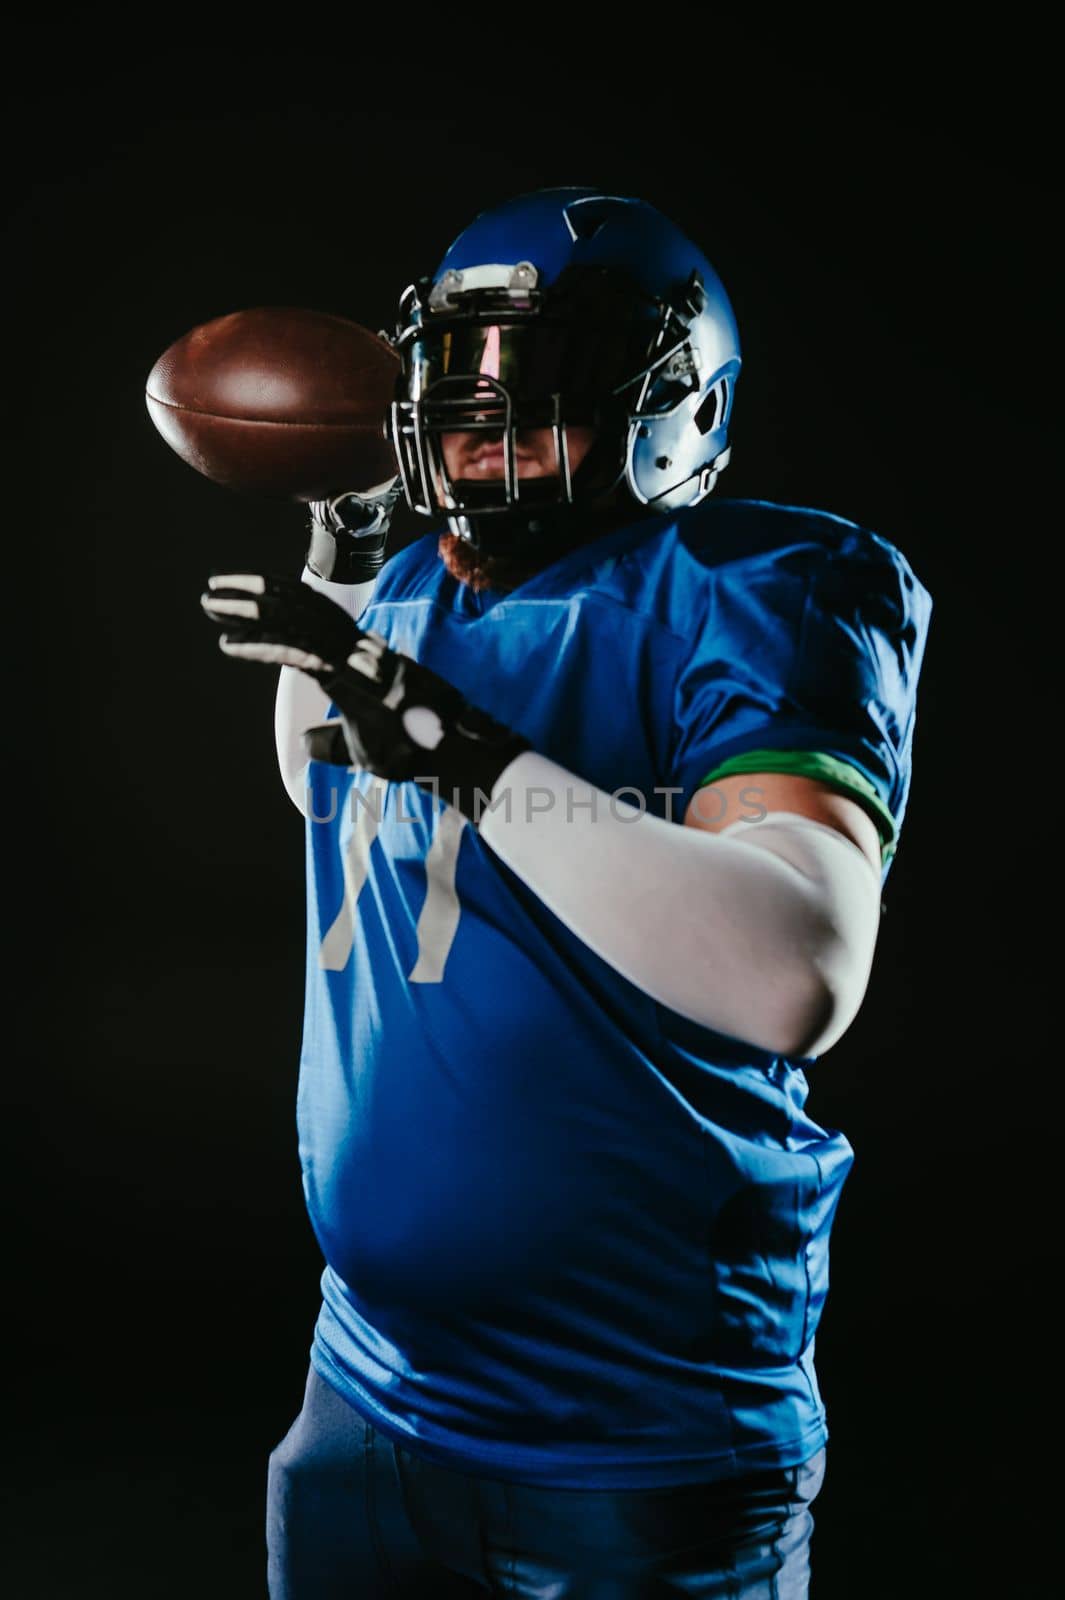 An Asian man with a red beard in a blue American football uniform throws a ball against a black background. by mrwed54